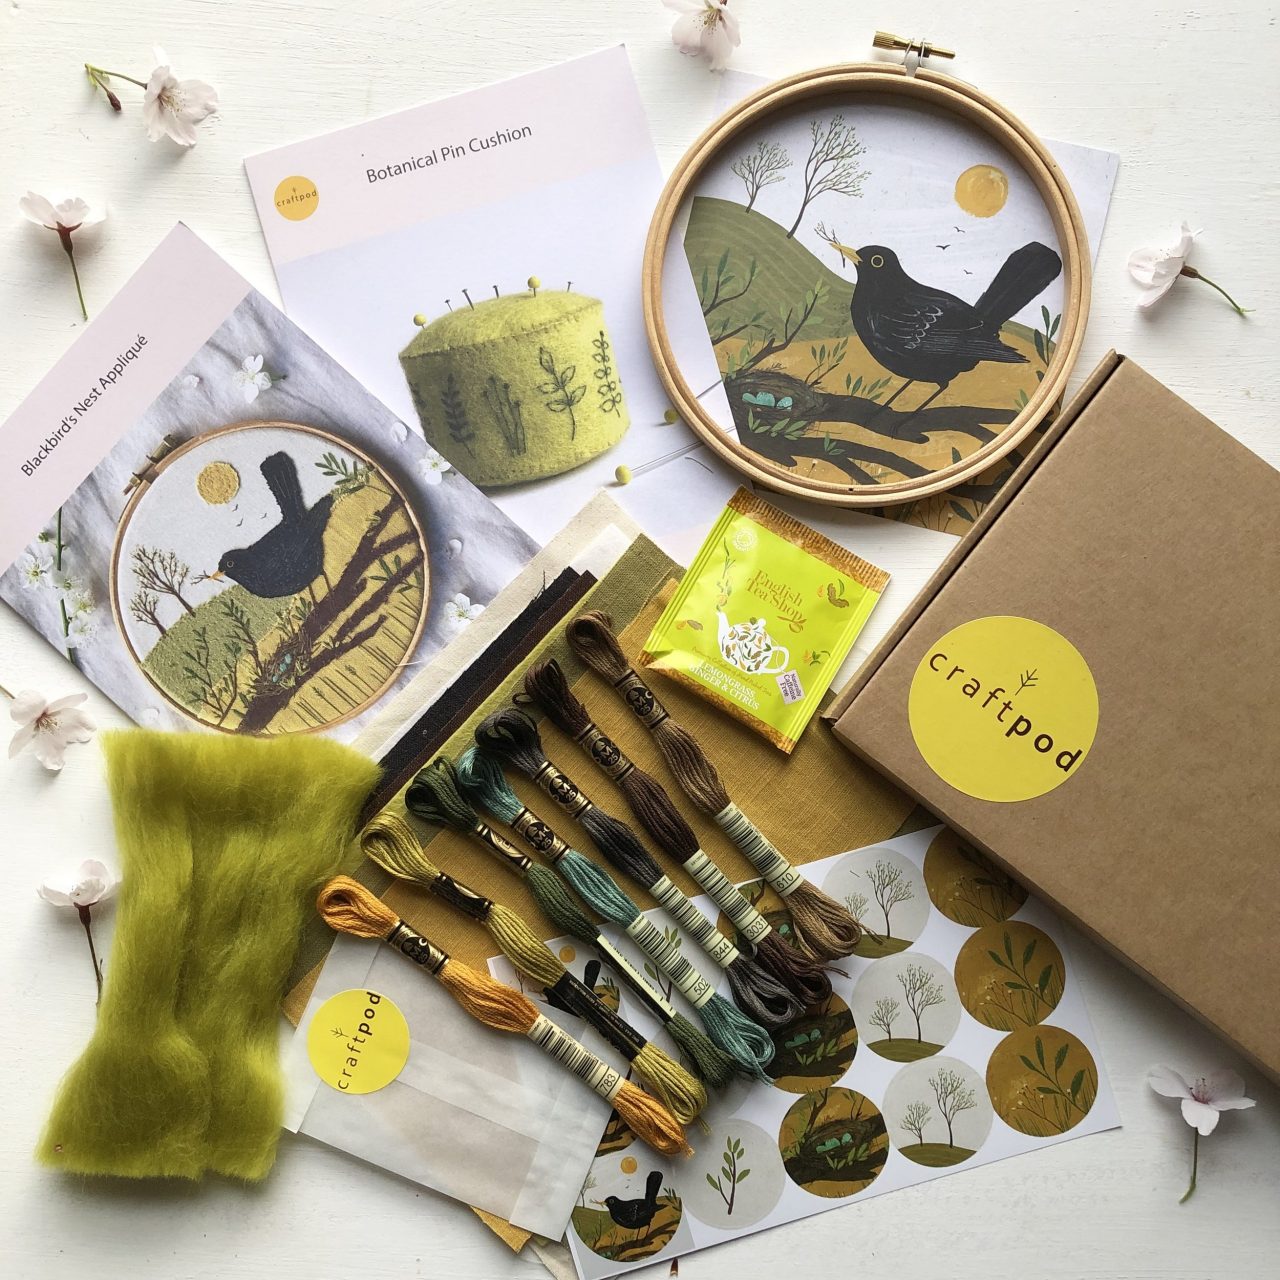 Craftpod craft subscription box nominated for best product at the Mollie Makes Handmade Awards 2019